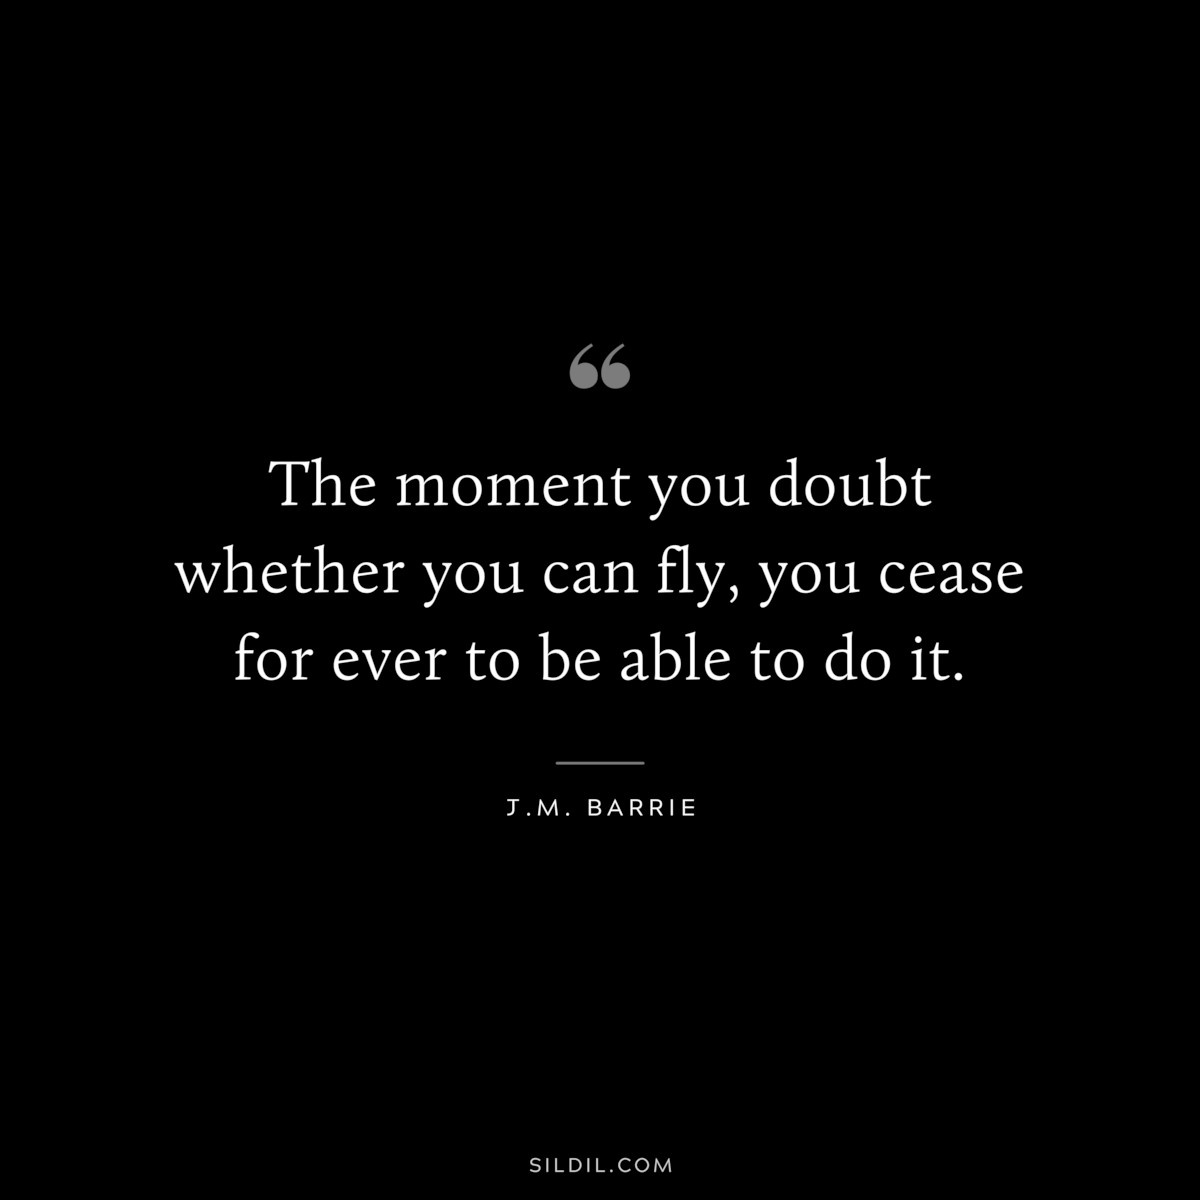 The moment you doubt whether you can fly, you cease for ever to be able to do it. ― J.M. Barrie